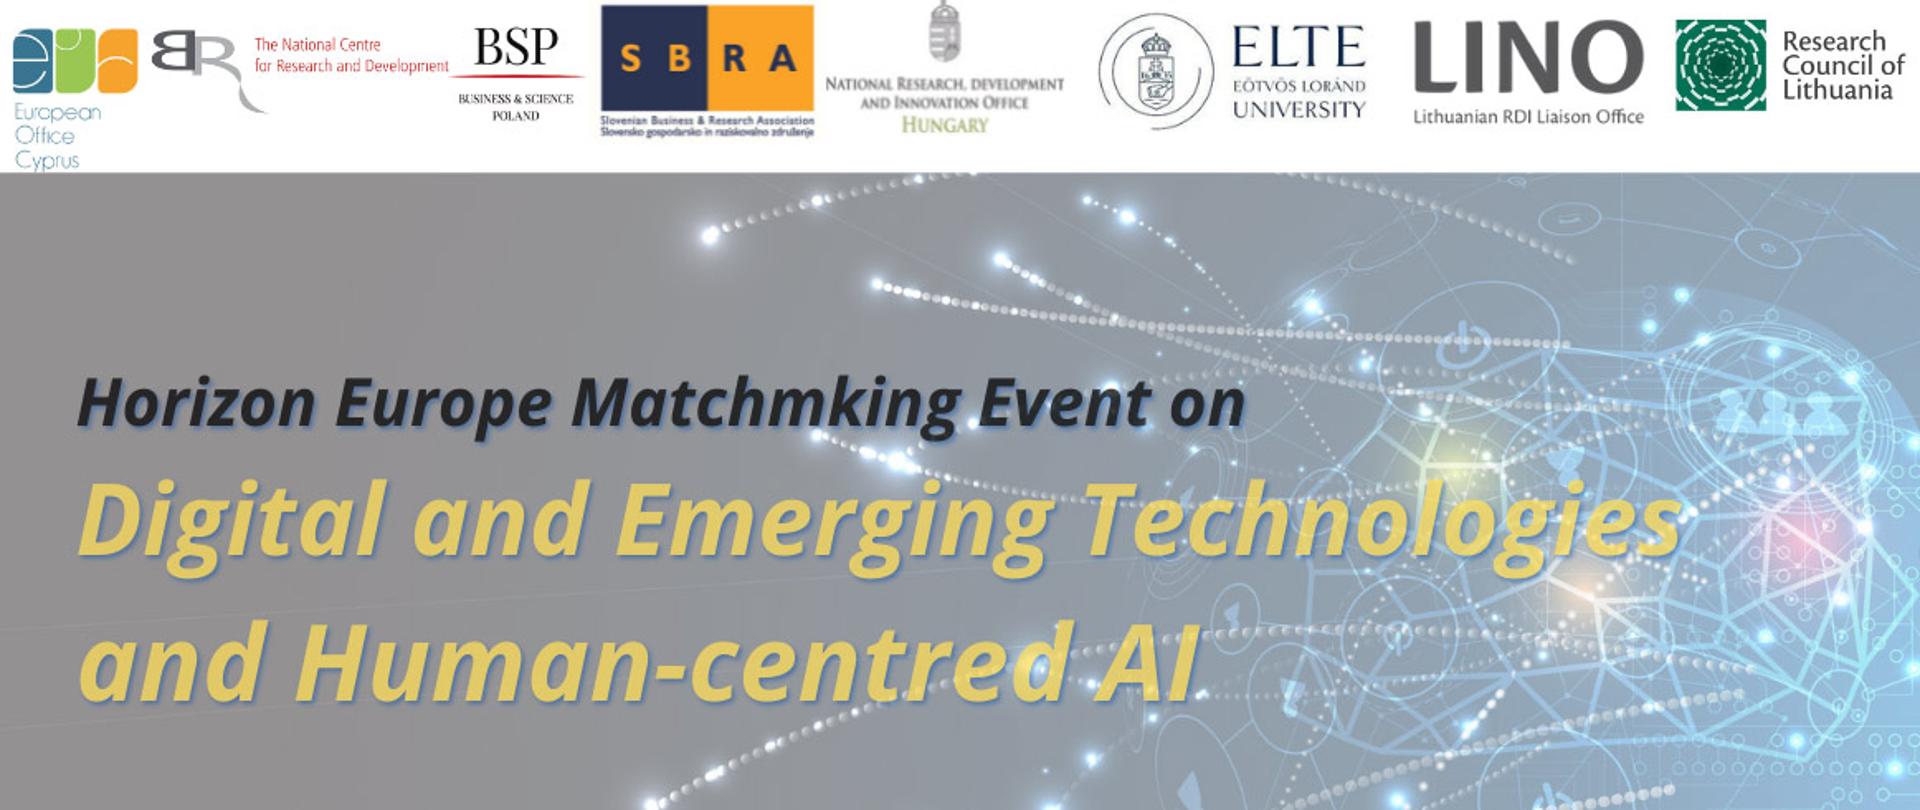 Horizon Europe Matchmaking Event on
Digital and Emerging Technologies and Human-centred AI
